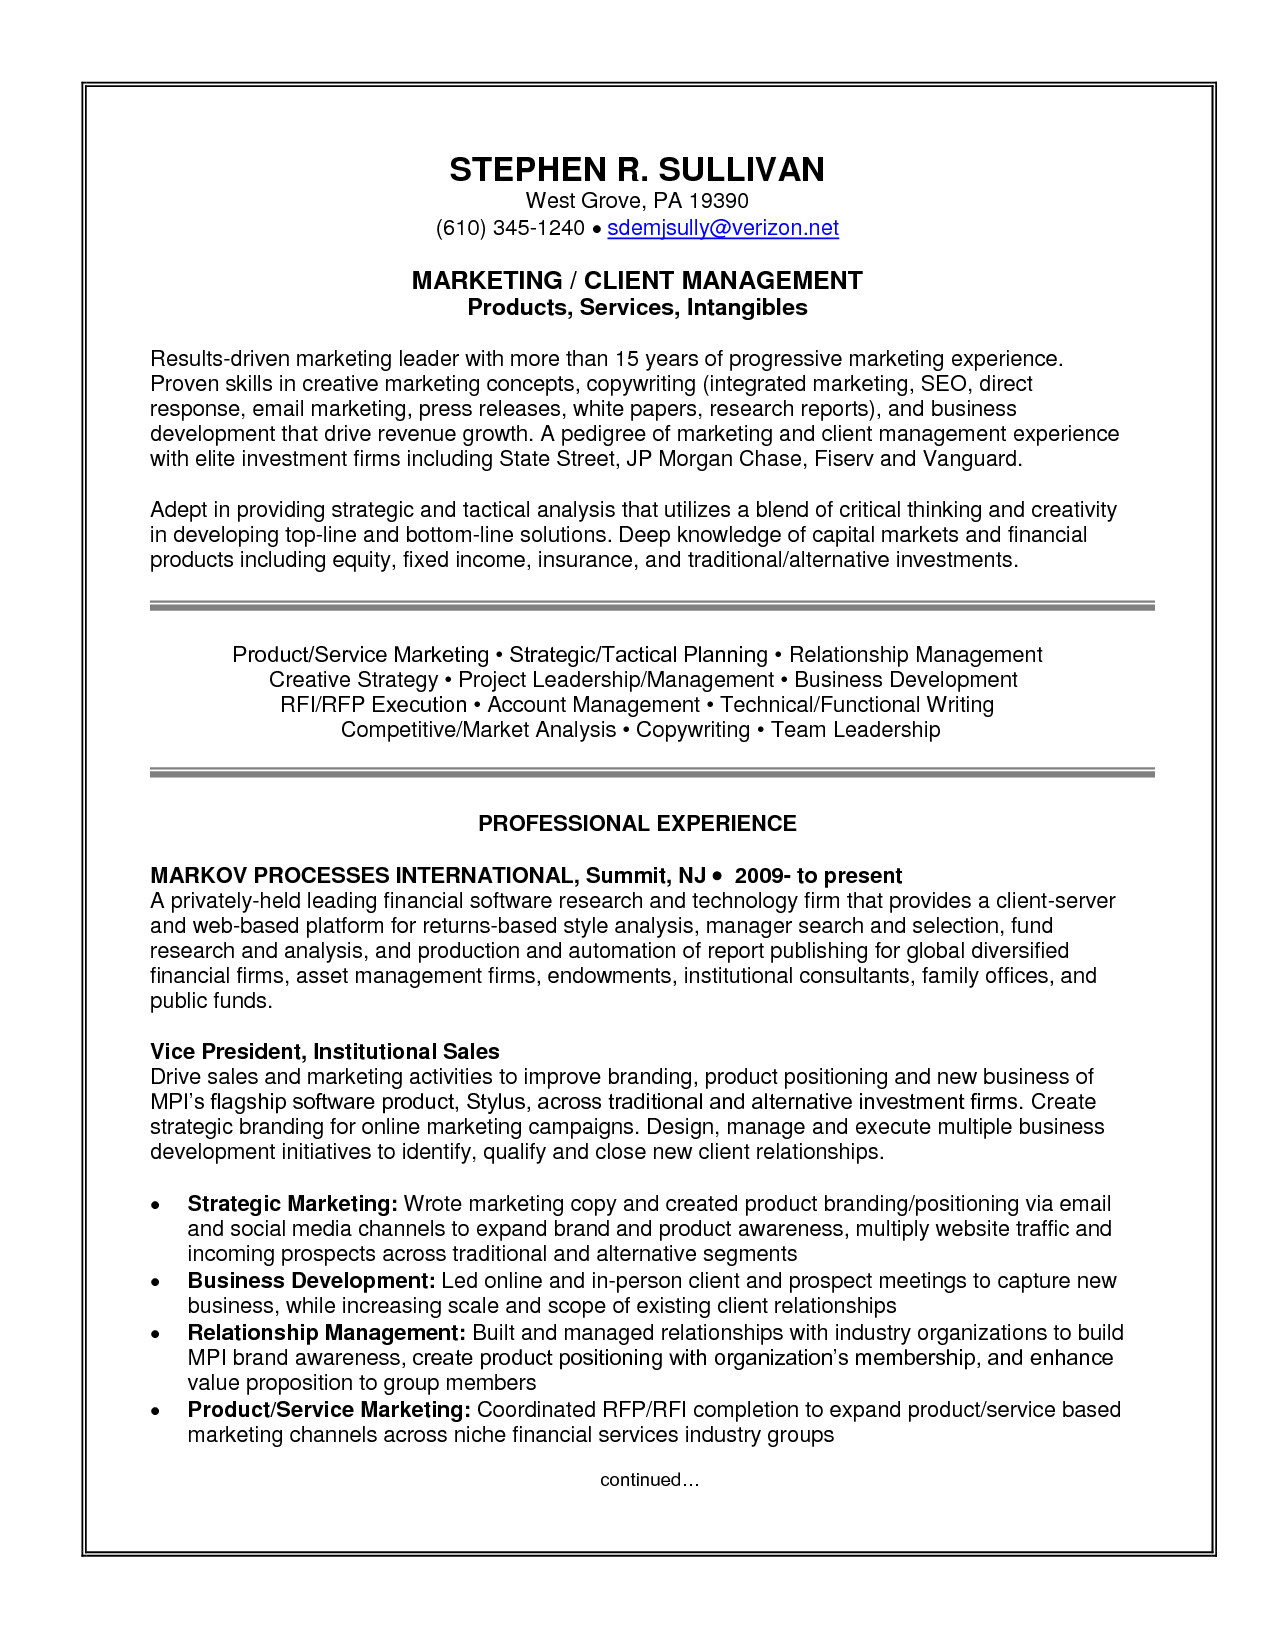 Letter to Investors Template - Sample Resume Writing format Reference Best Ideas 6 Sample Warehouse